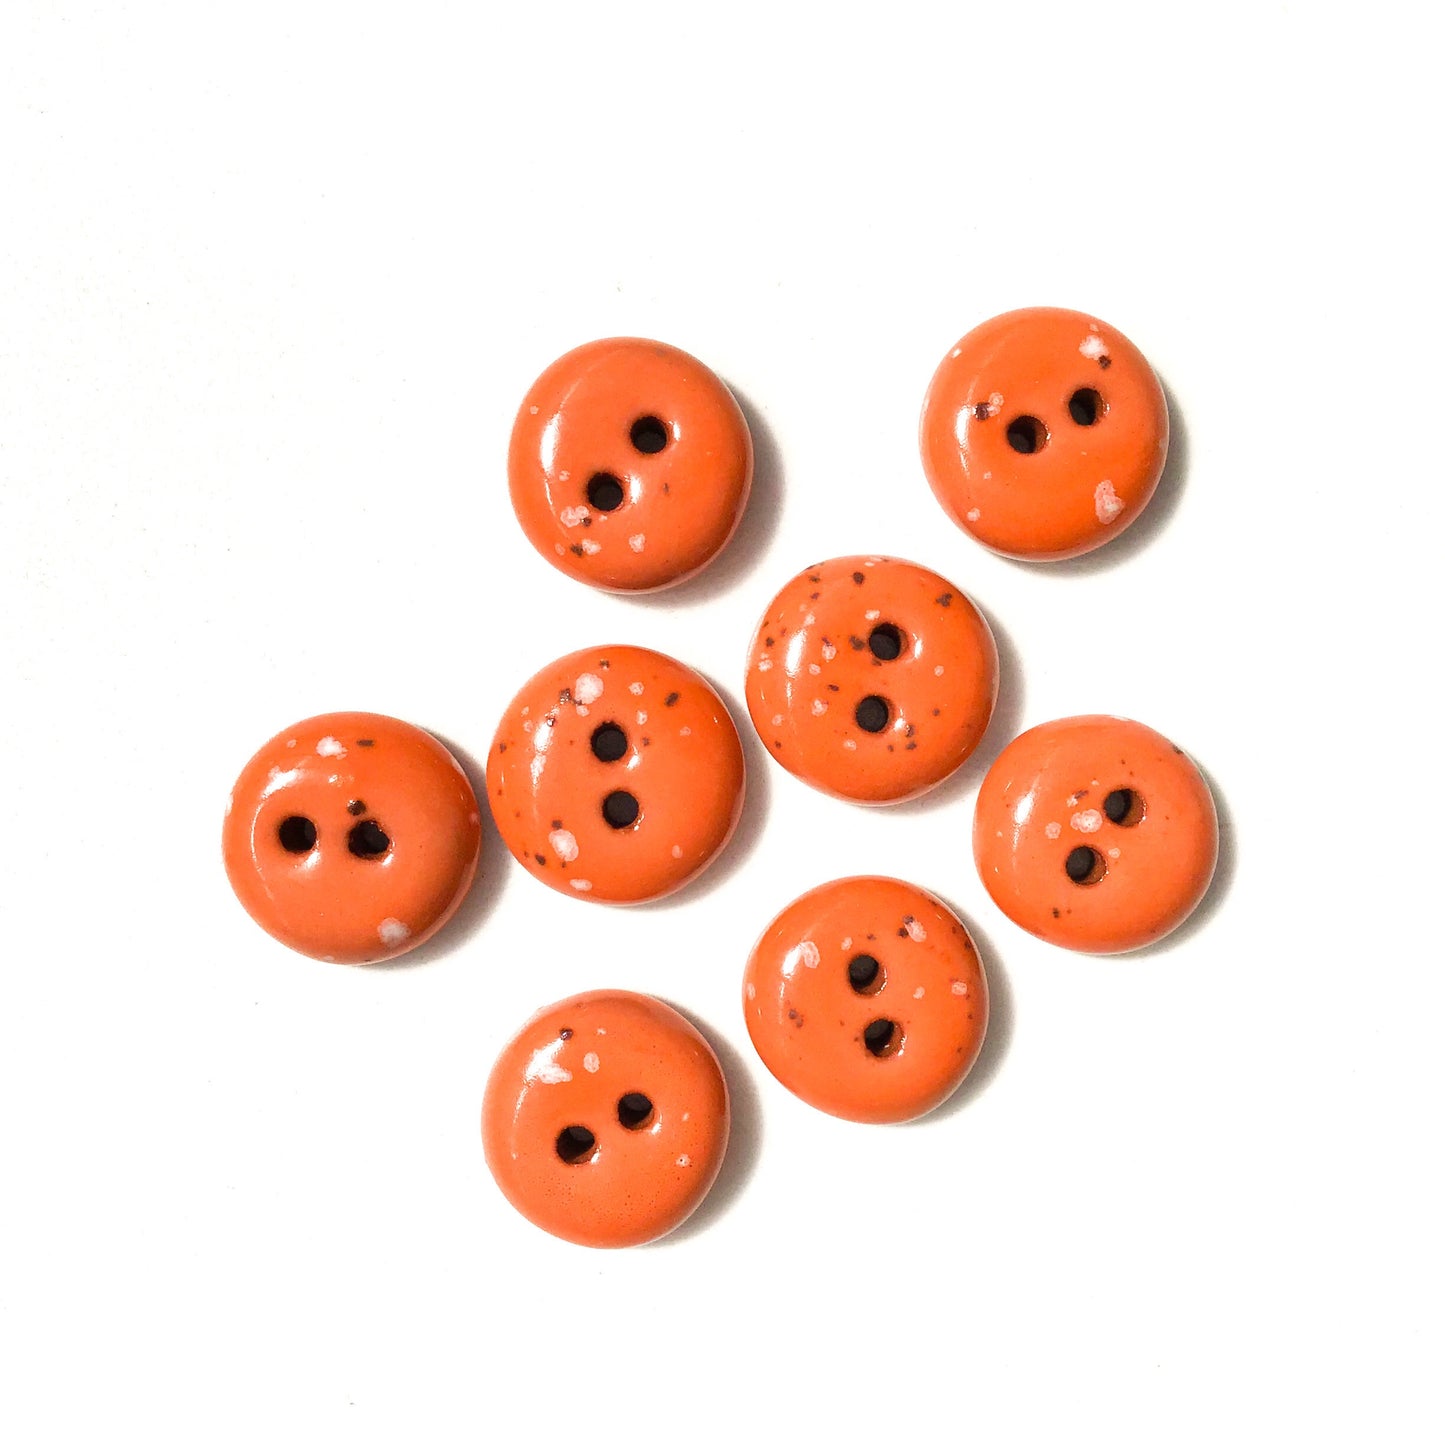 Speckled Orange Clay Buttons - Orange Clay Buttons - 9/16" - 8 Pack